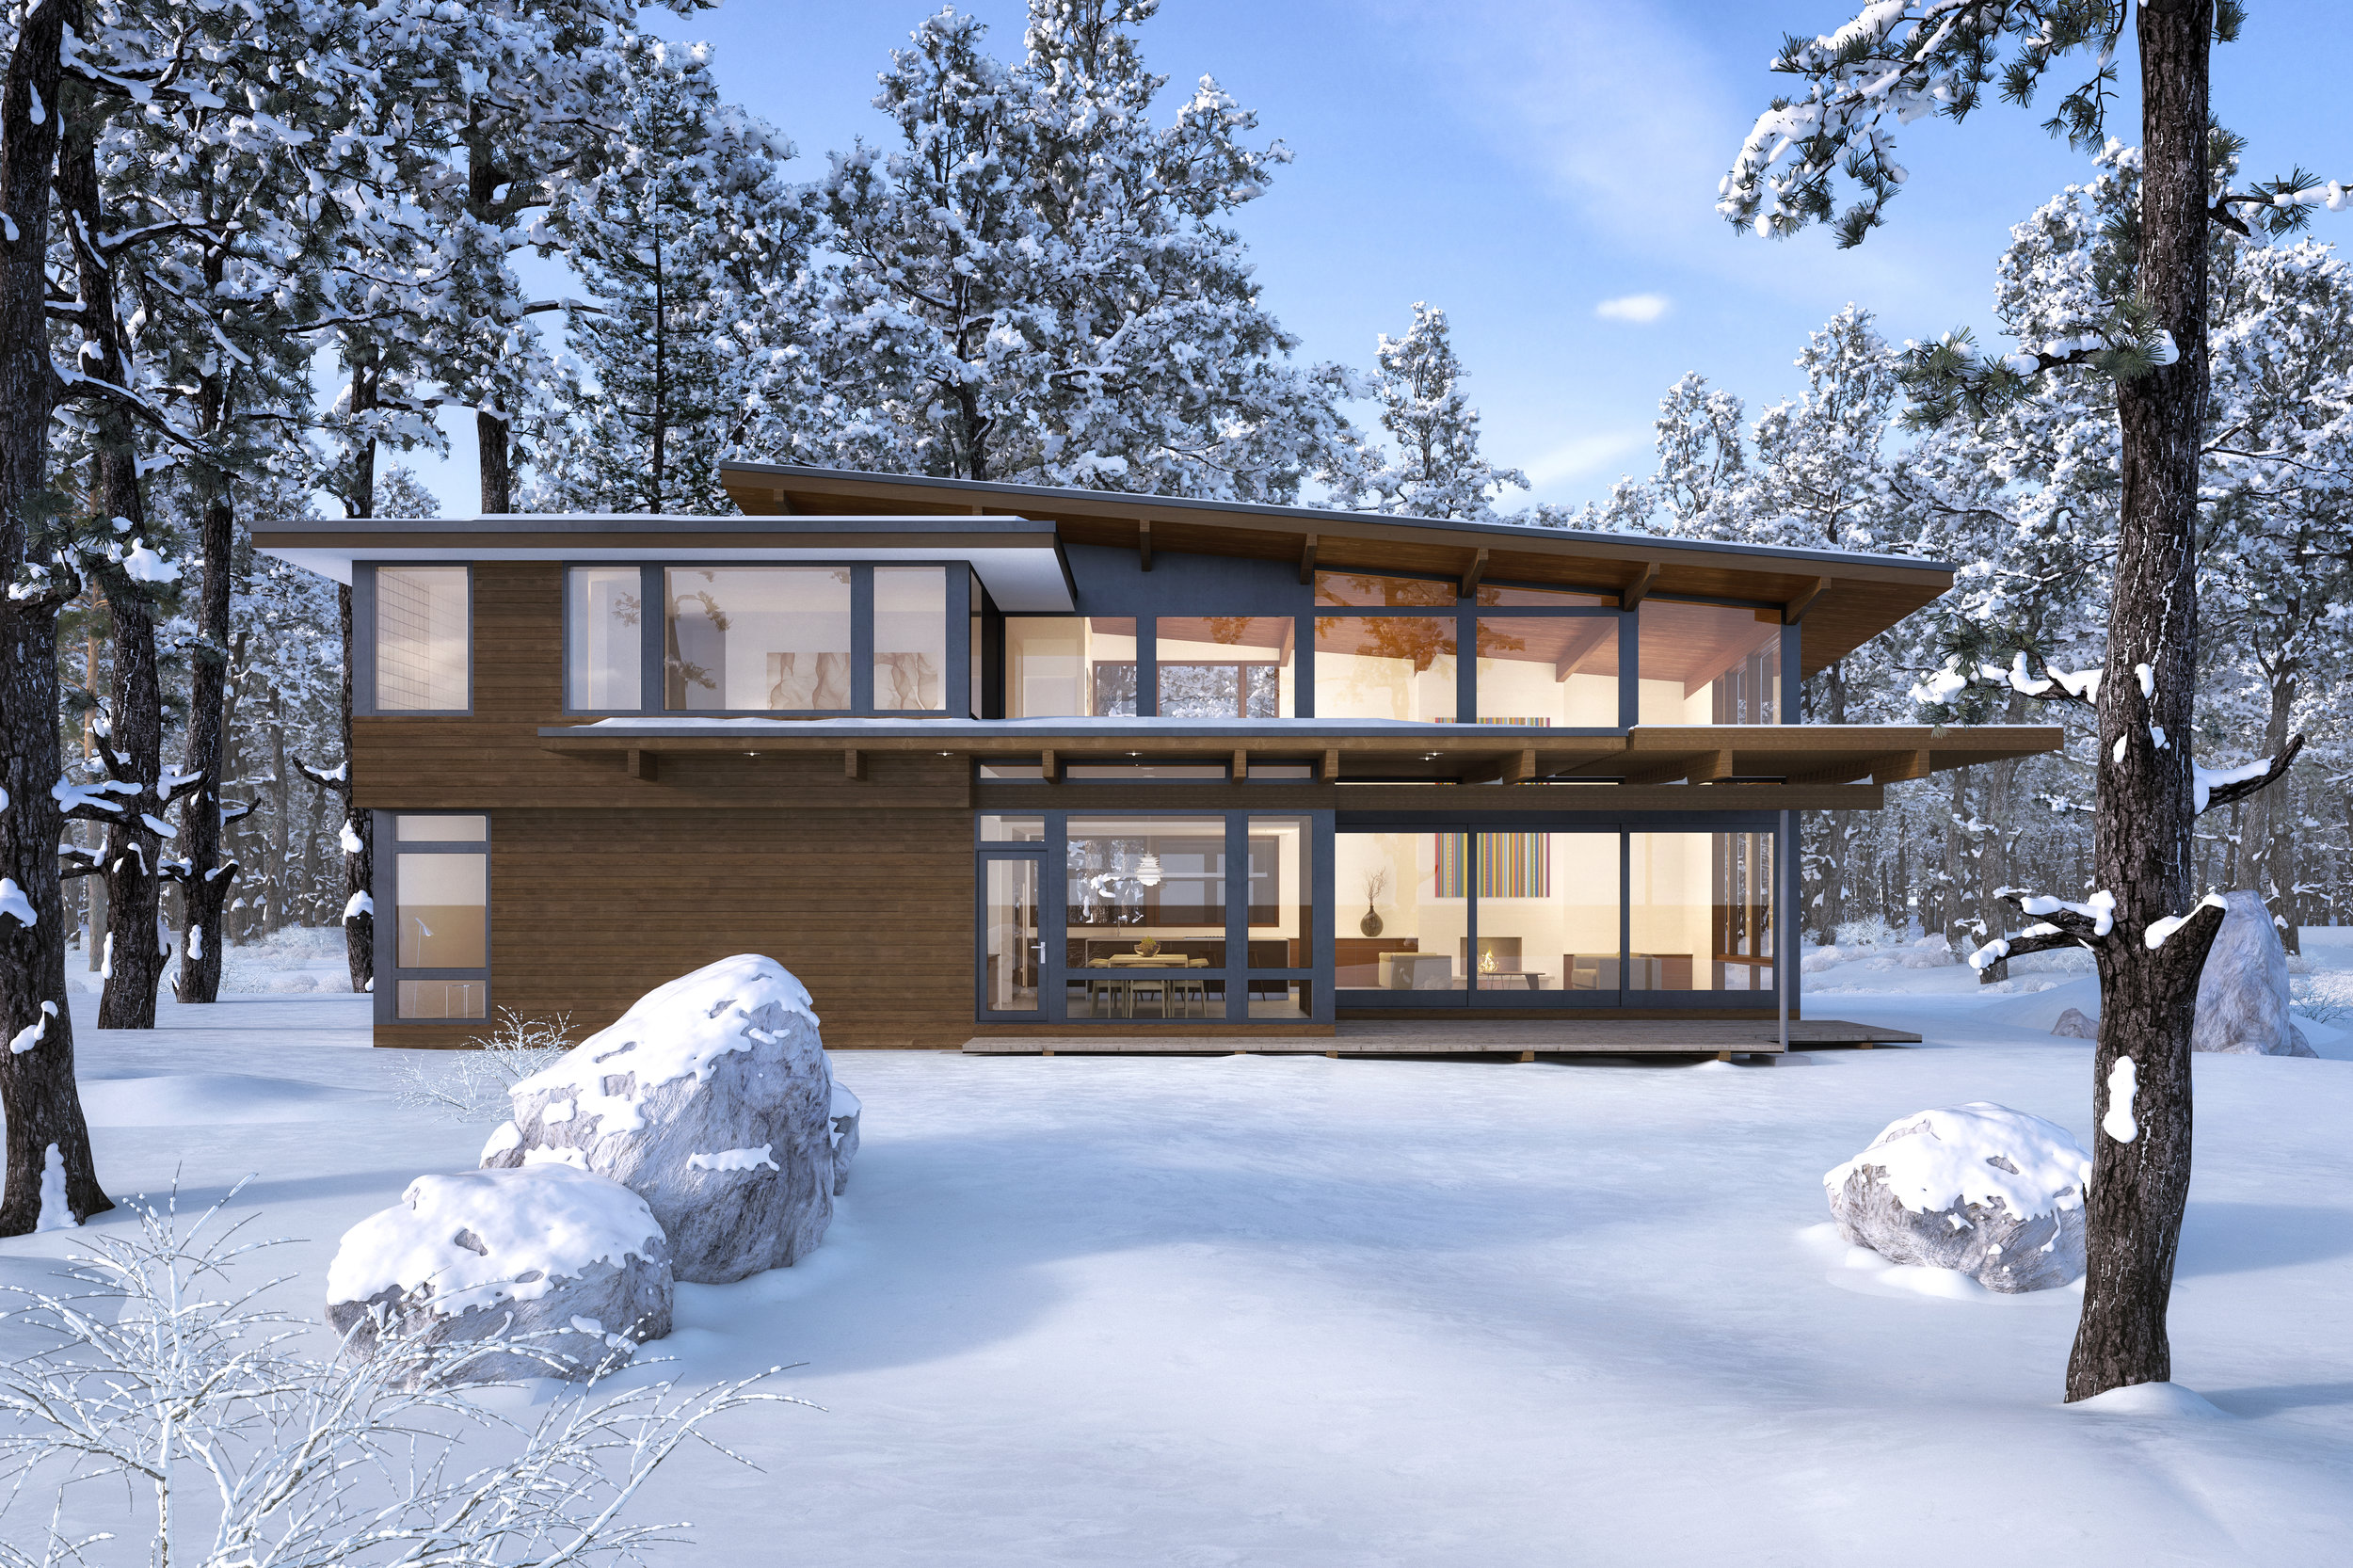 Rendering of a modern home in a snowy landscape